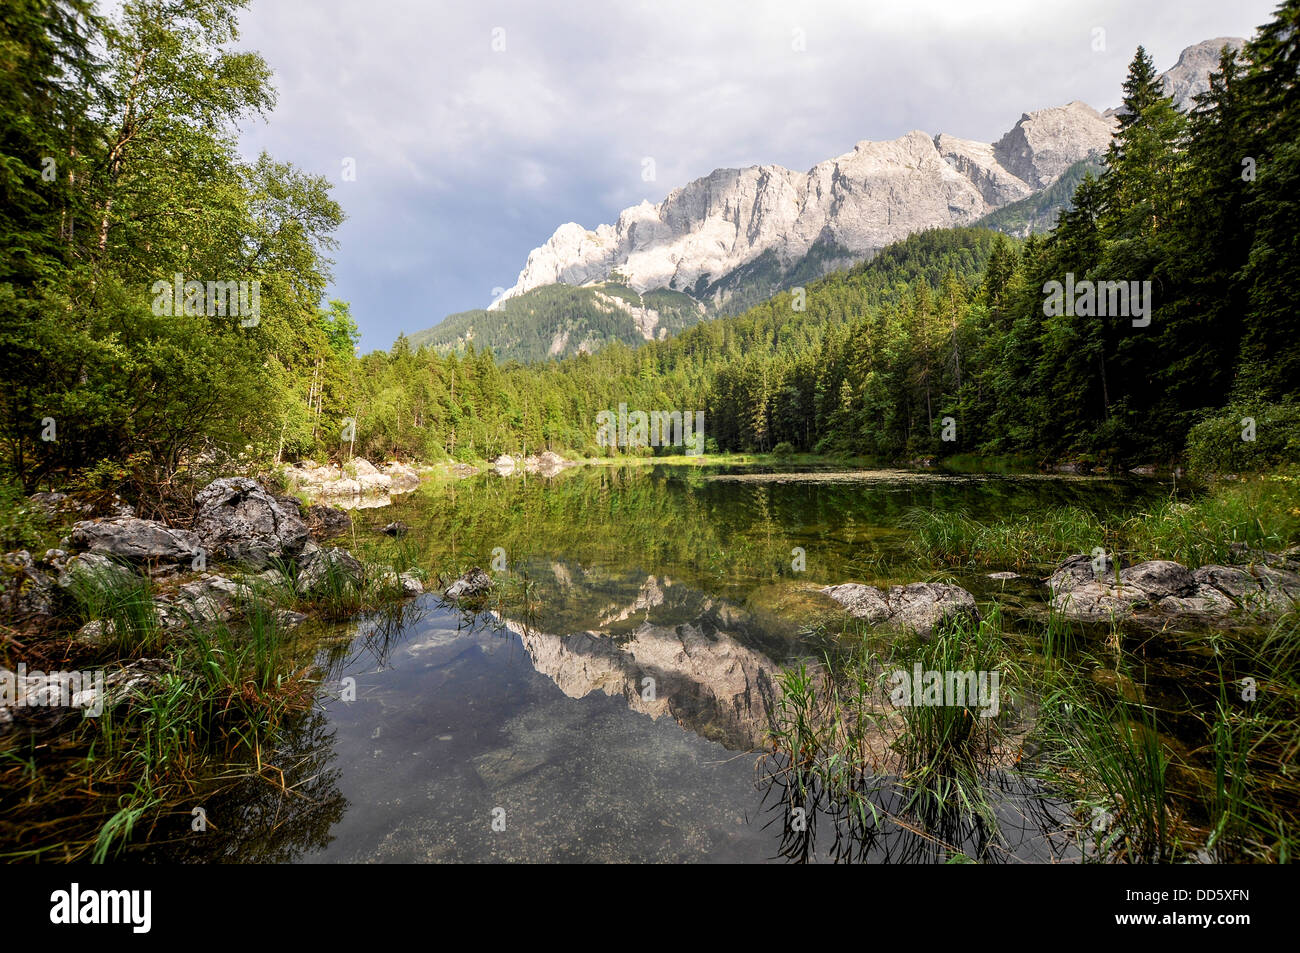 Eibsee In Germany With The Mountain Zugspitze In The 